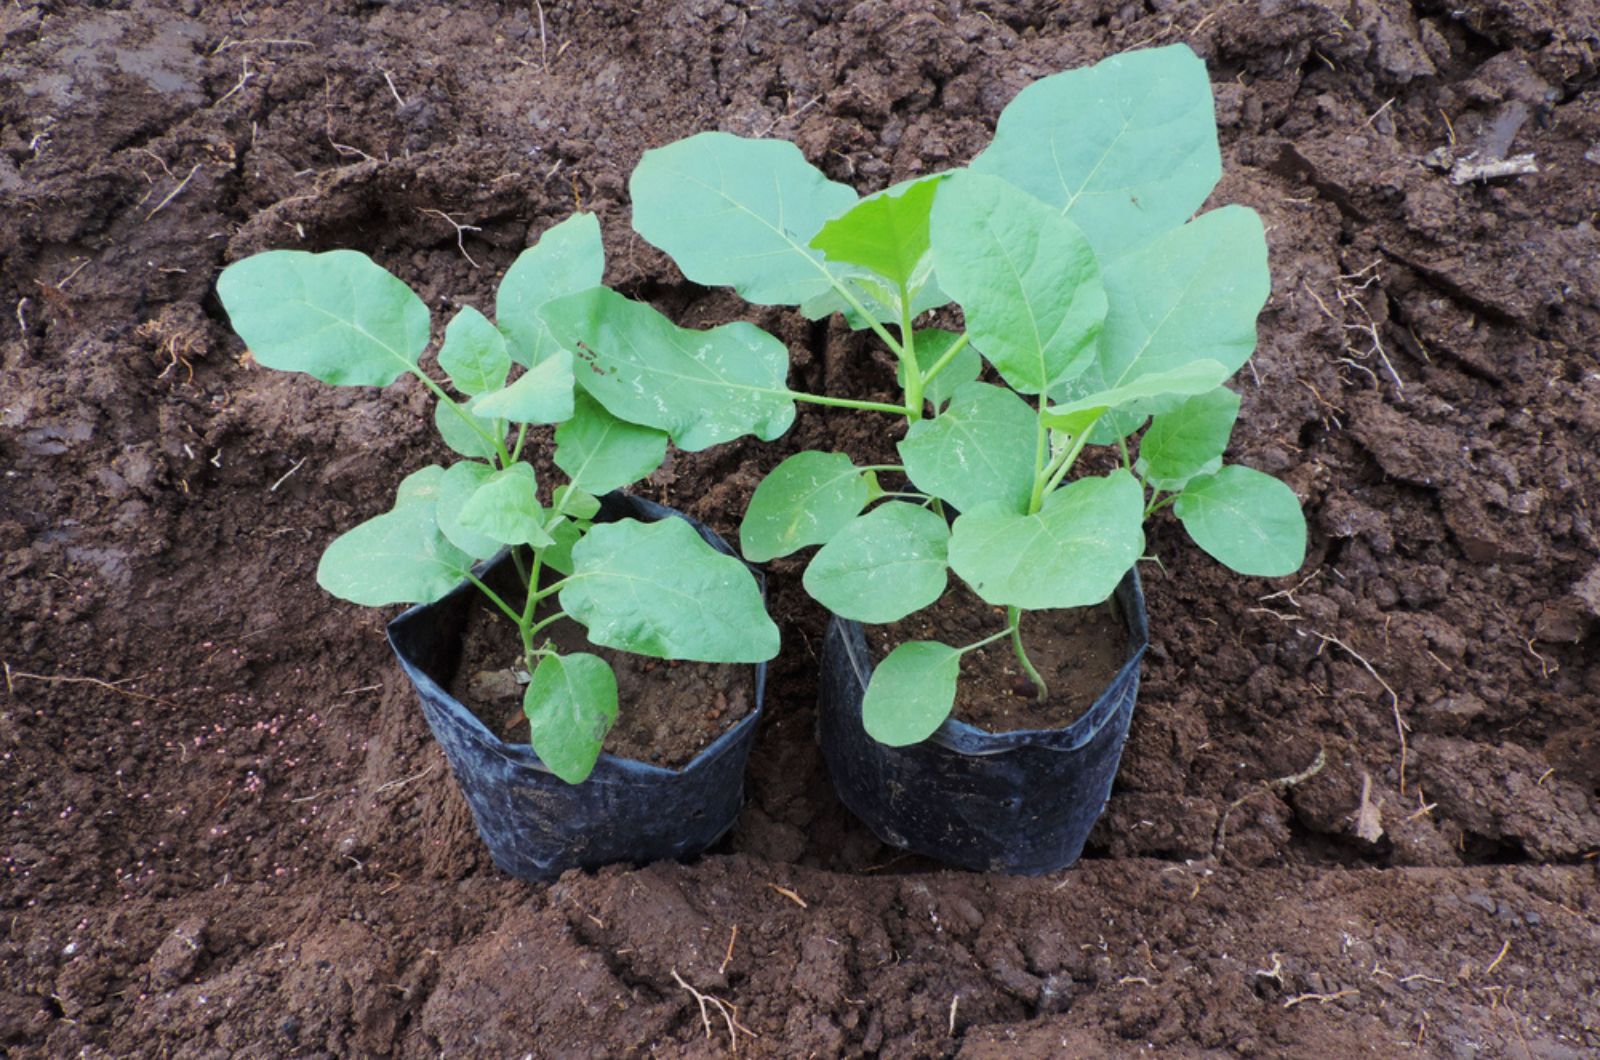 Seedlings of eggplant is ready to grow in soil nature.